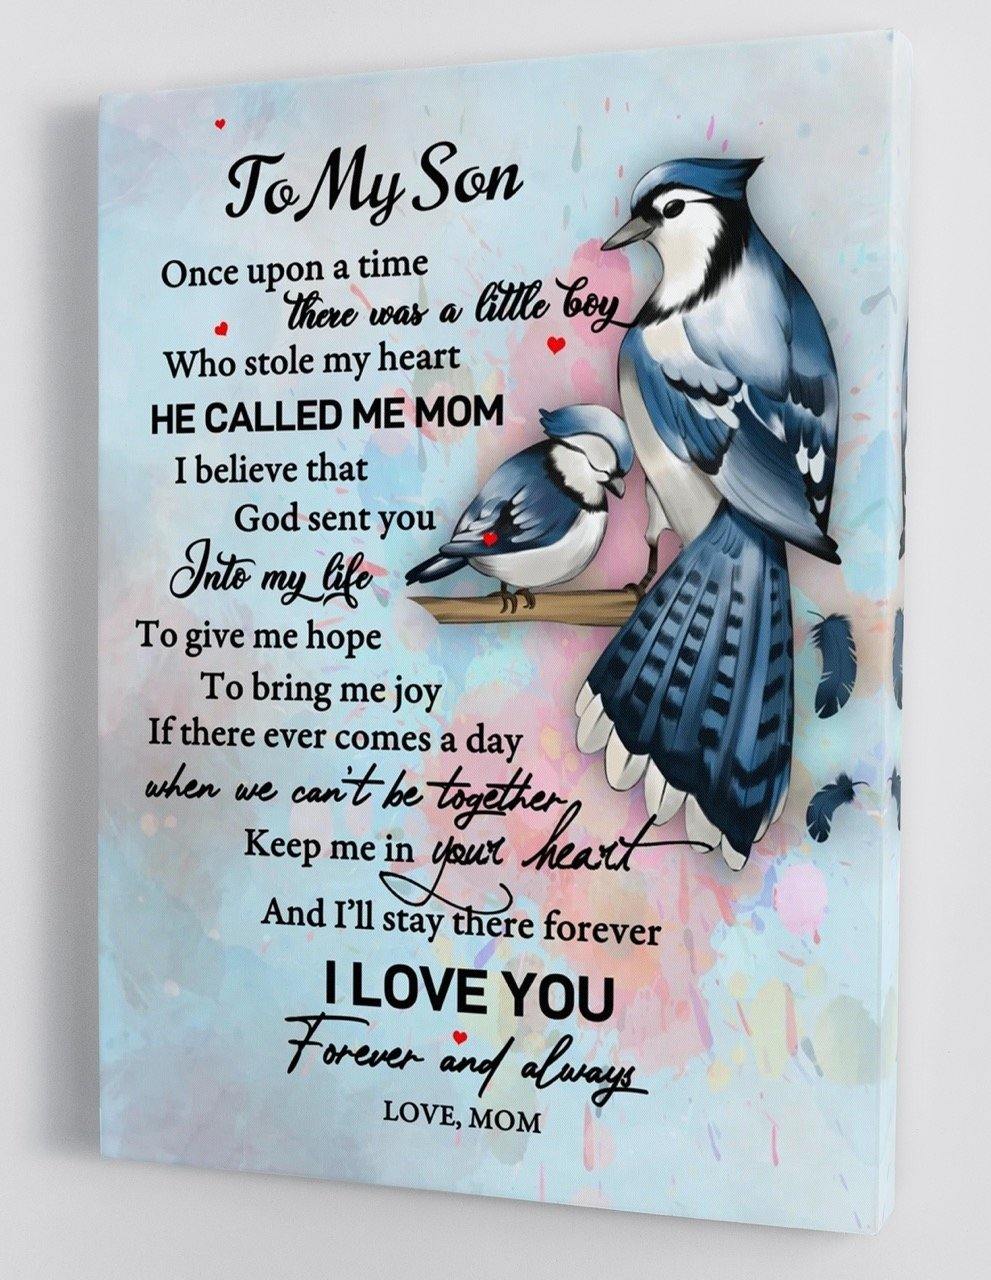 To My Son - From Mom - Framed Canvas Gift MS015 - DivesArt LLC